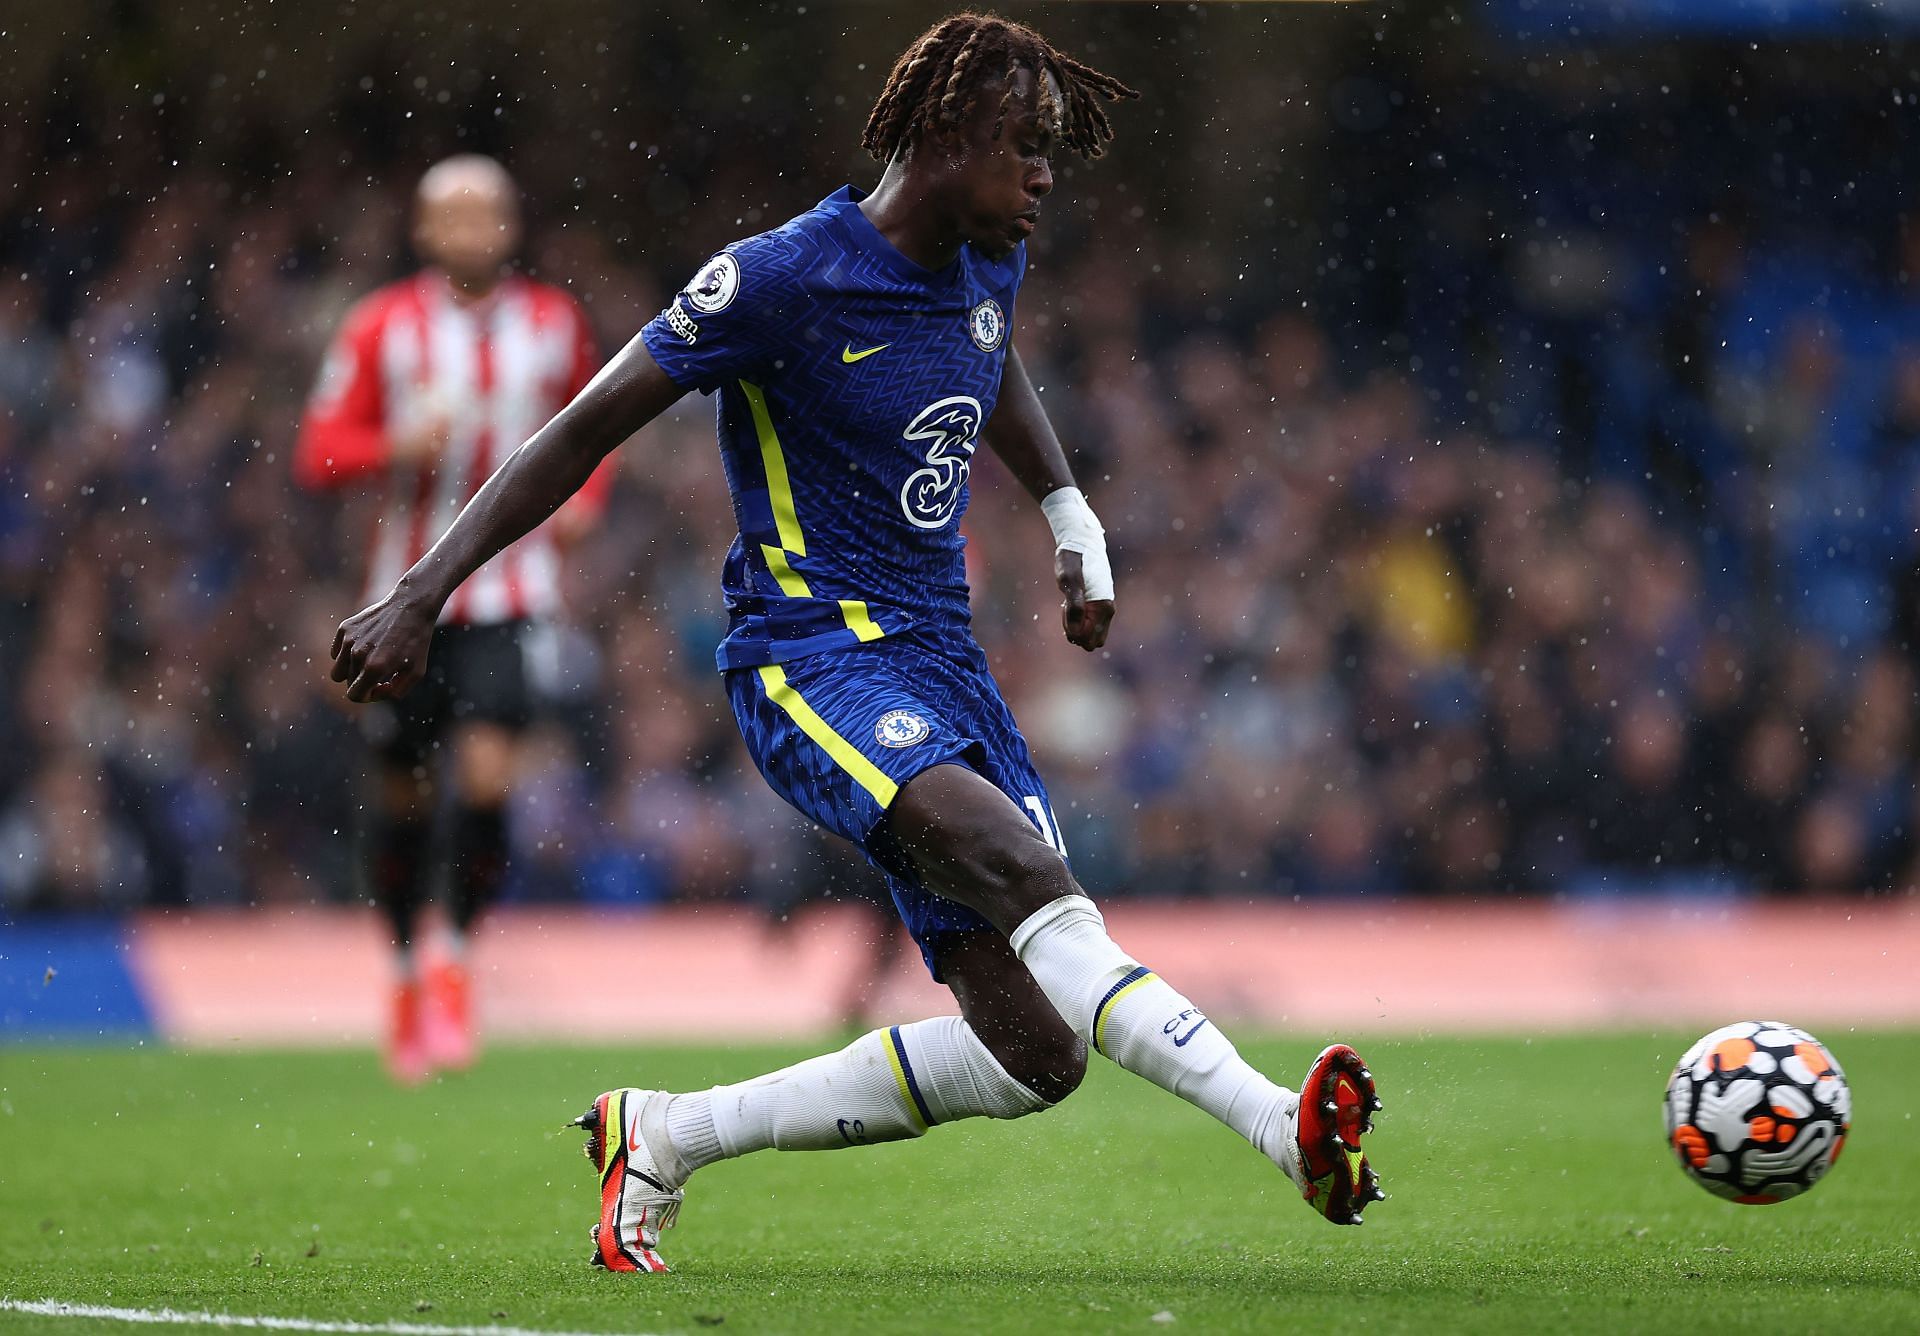 Trevoh Chalobah&#039;s emergence could affect Chelsea&#039;s plans for next year&#039;s transfer window.